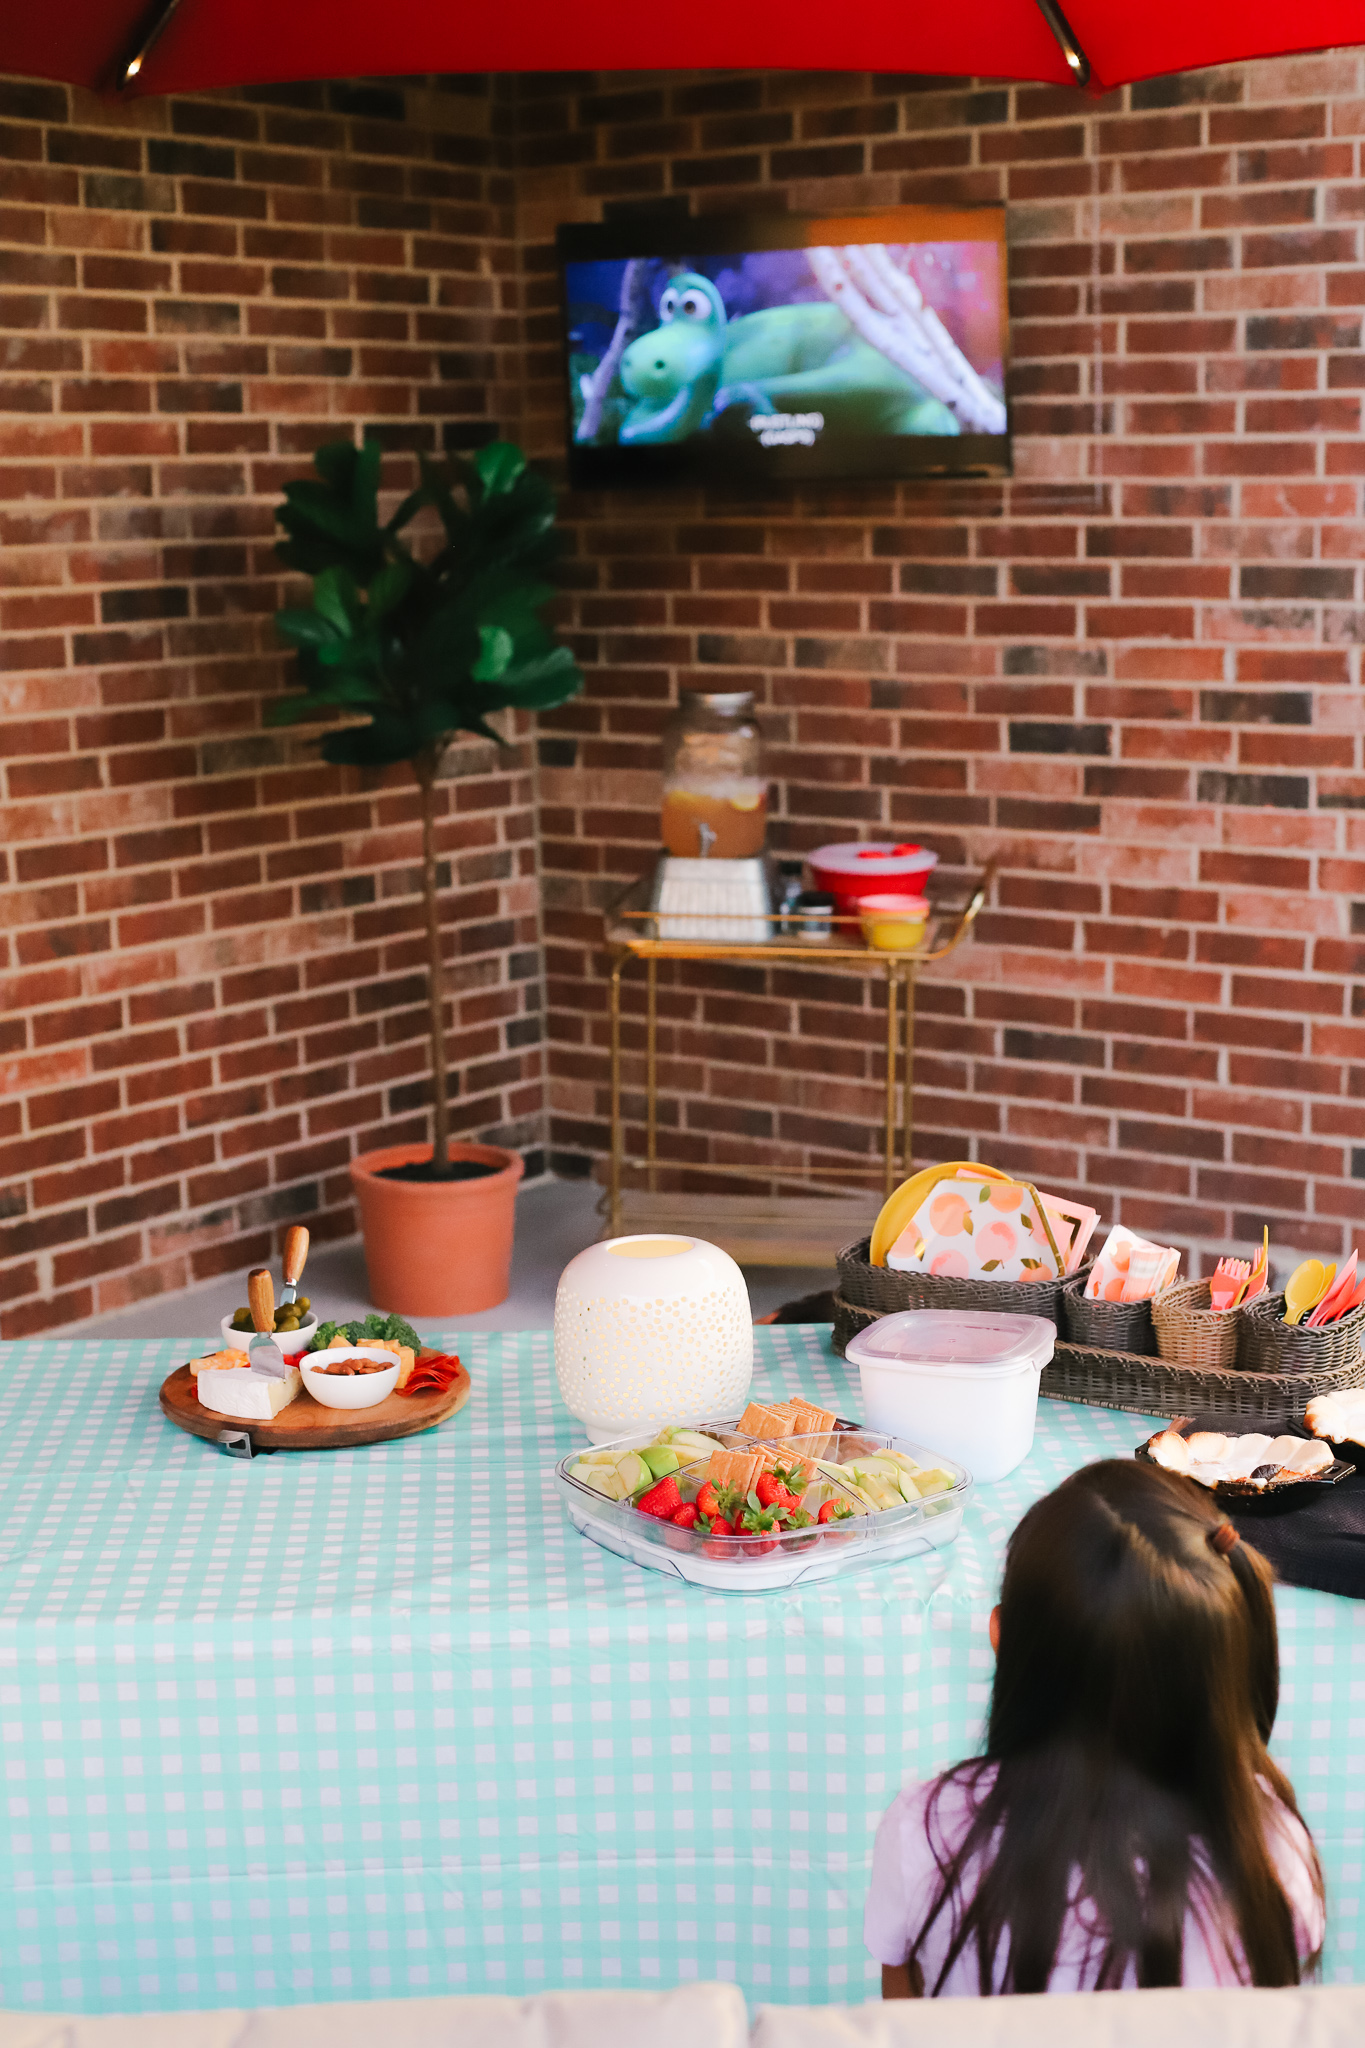 Tips for a fun family movie night!